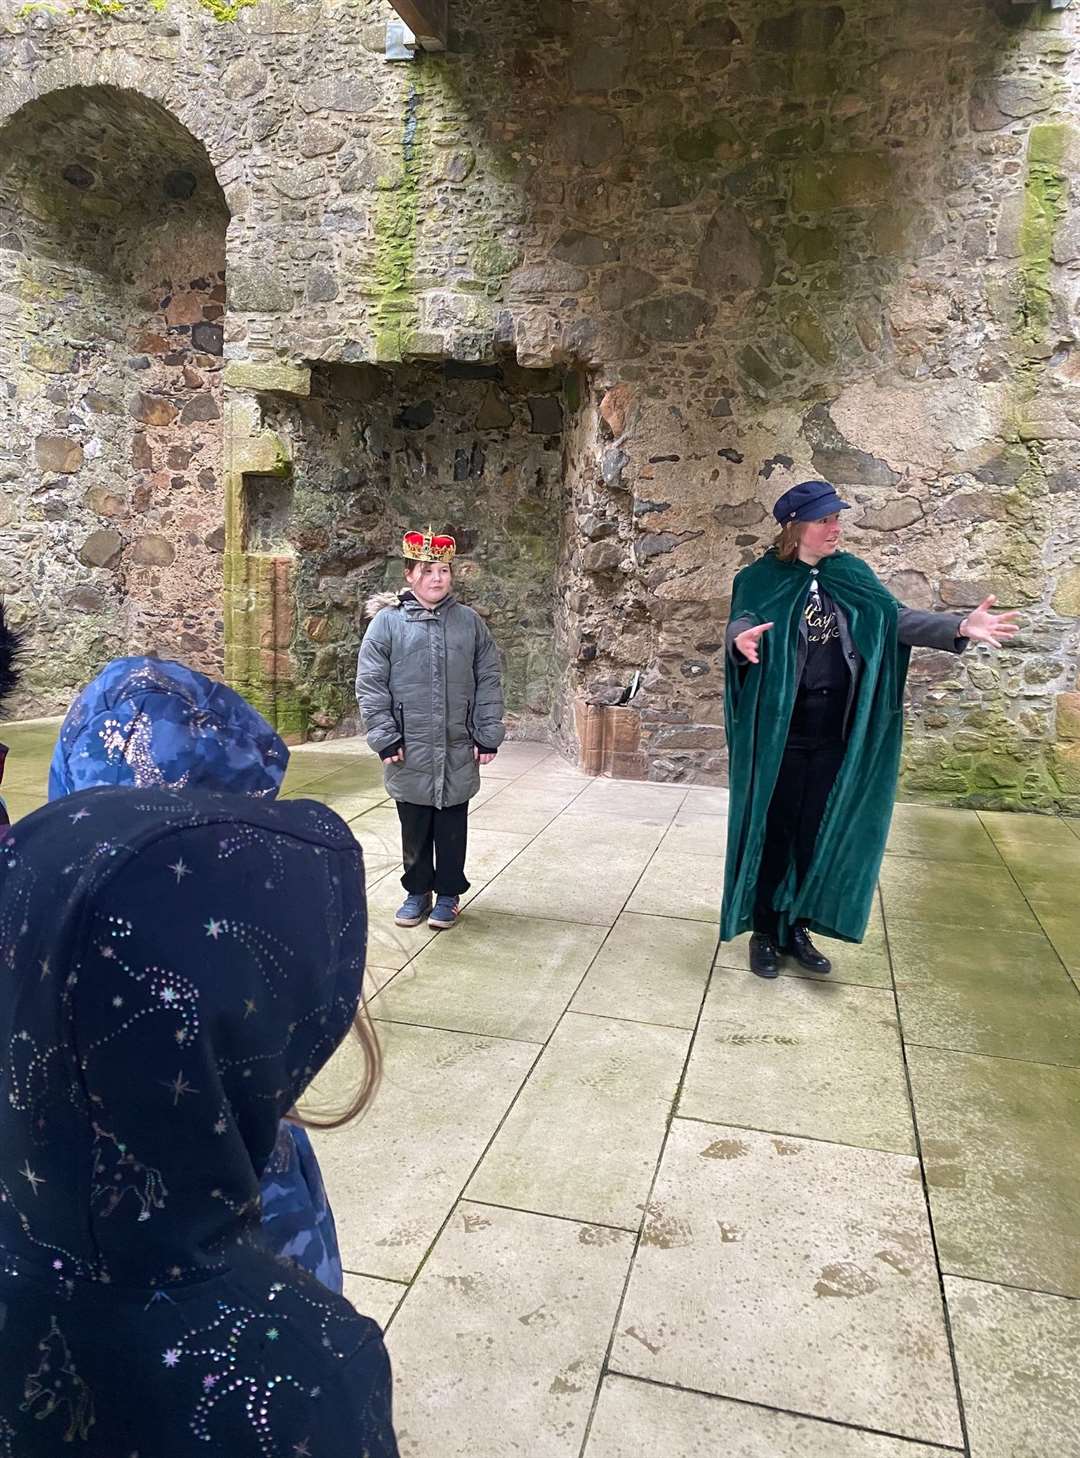 Kids being treated to readings from the novel along with mini tours of the castle.